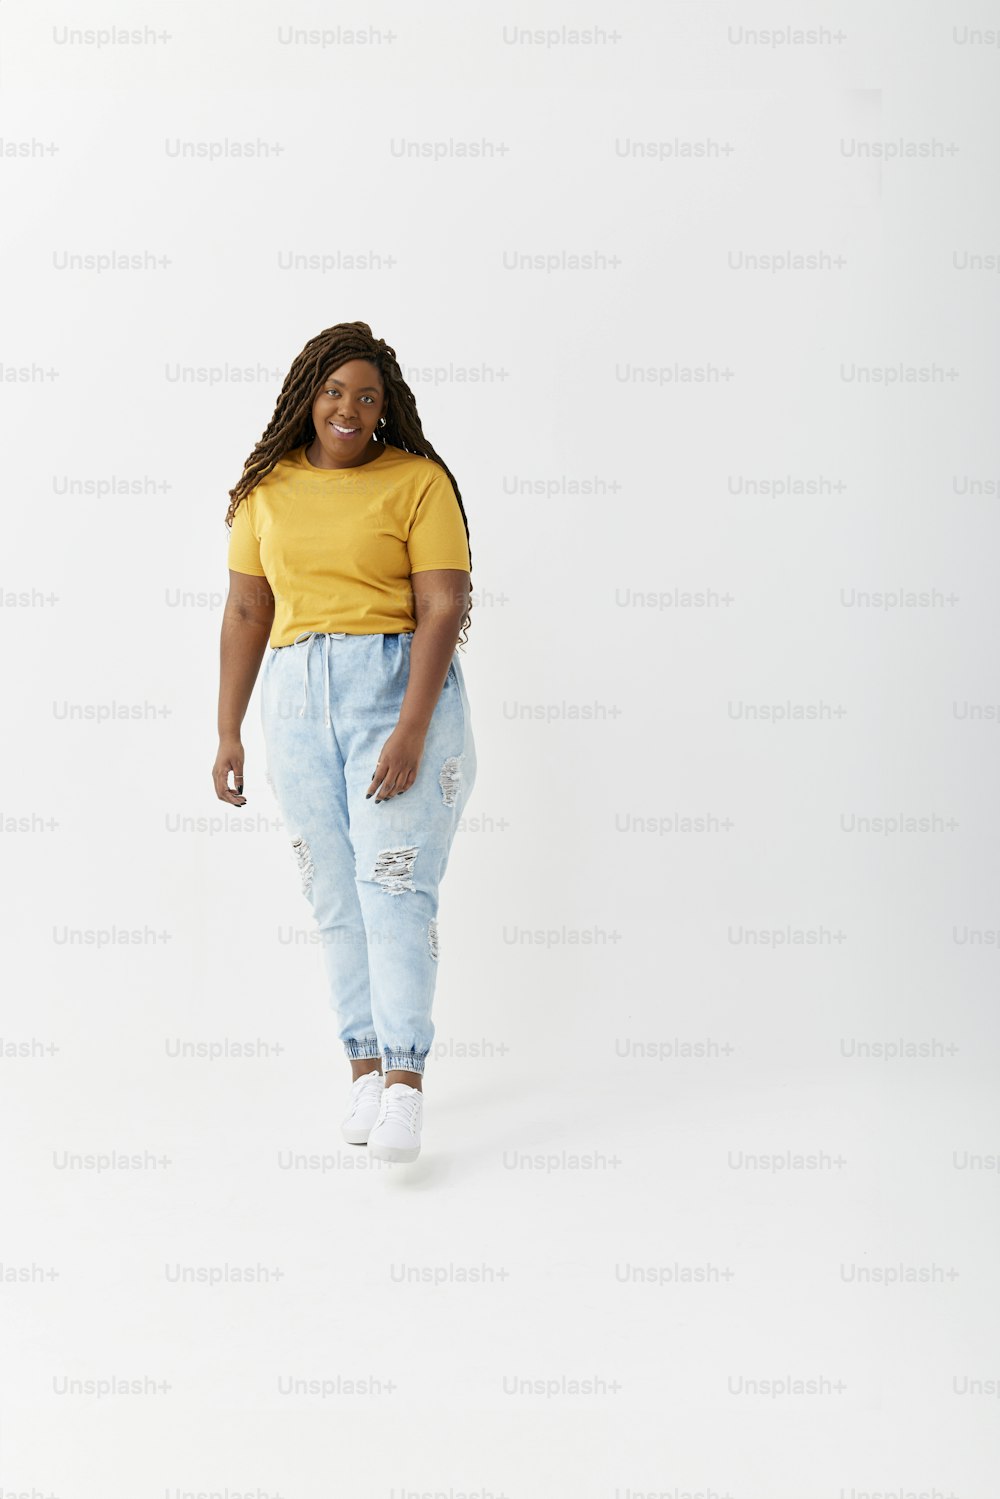 a woman in a yellow shirt and blue jeans